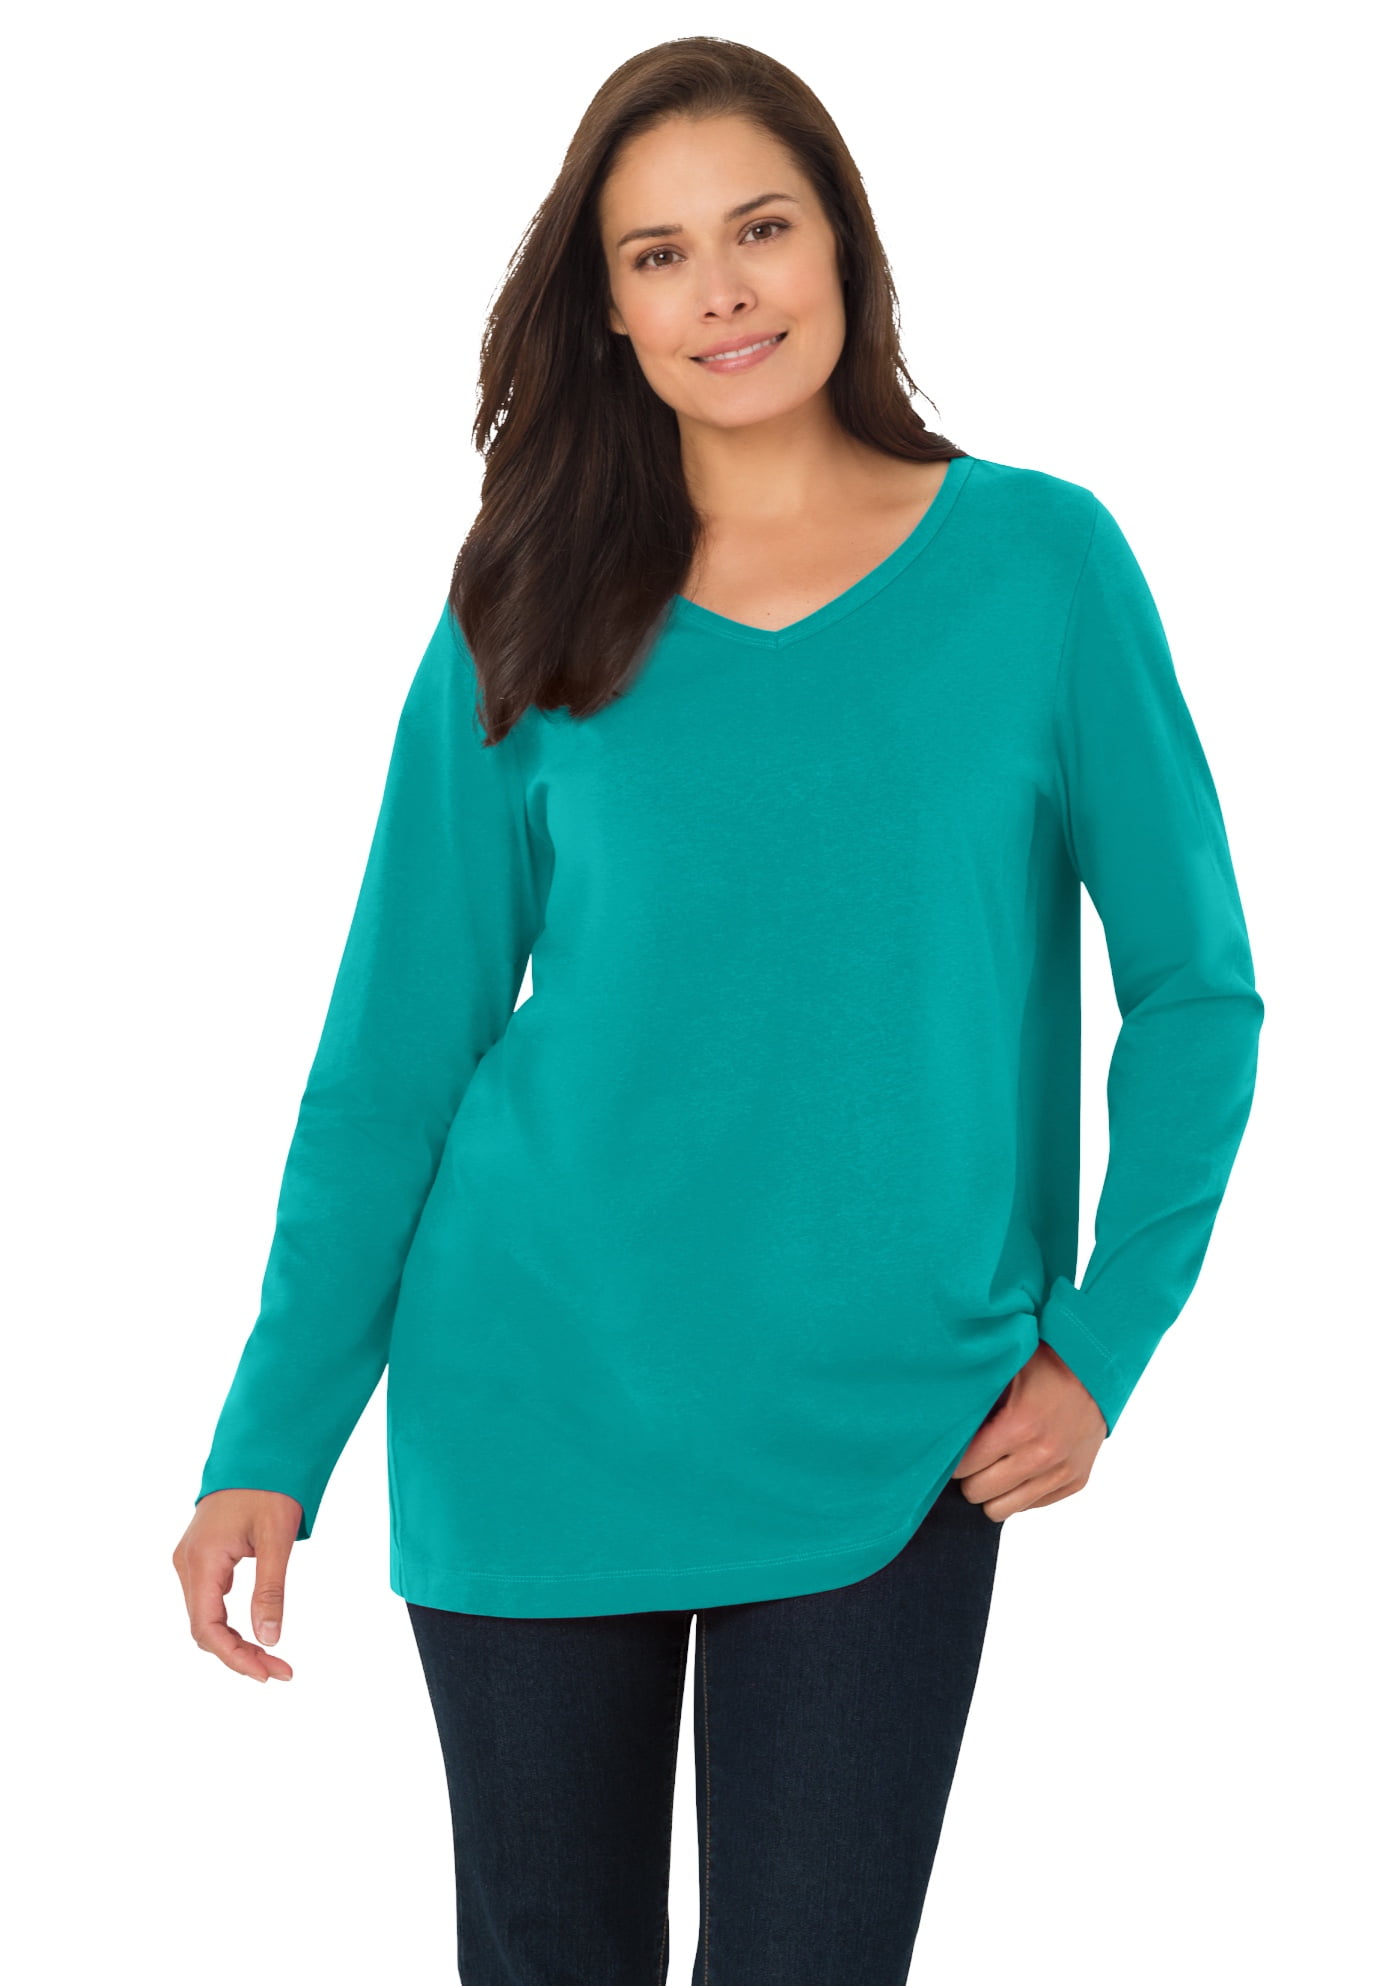 Woman Within Women's Plus Size Perfect Long-Sleeve V-Neck Tee - Walmart.com